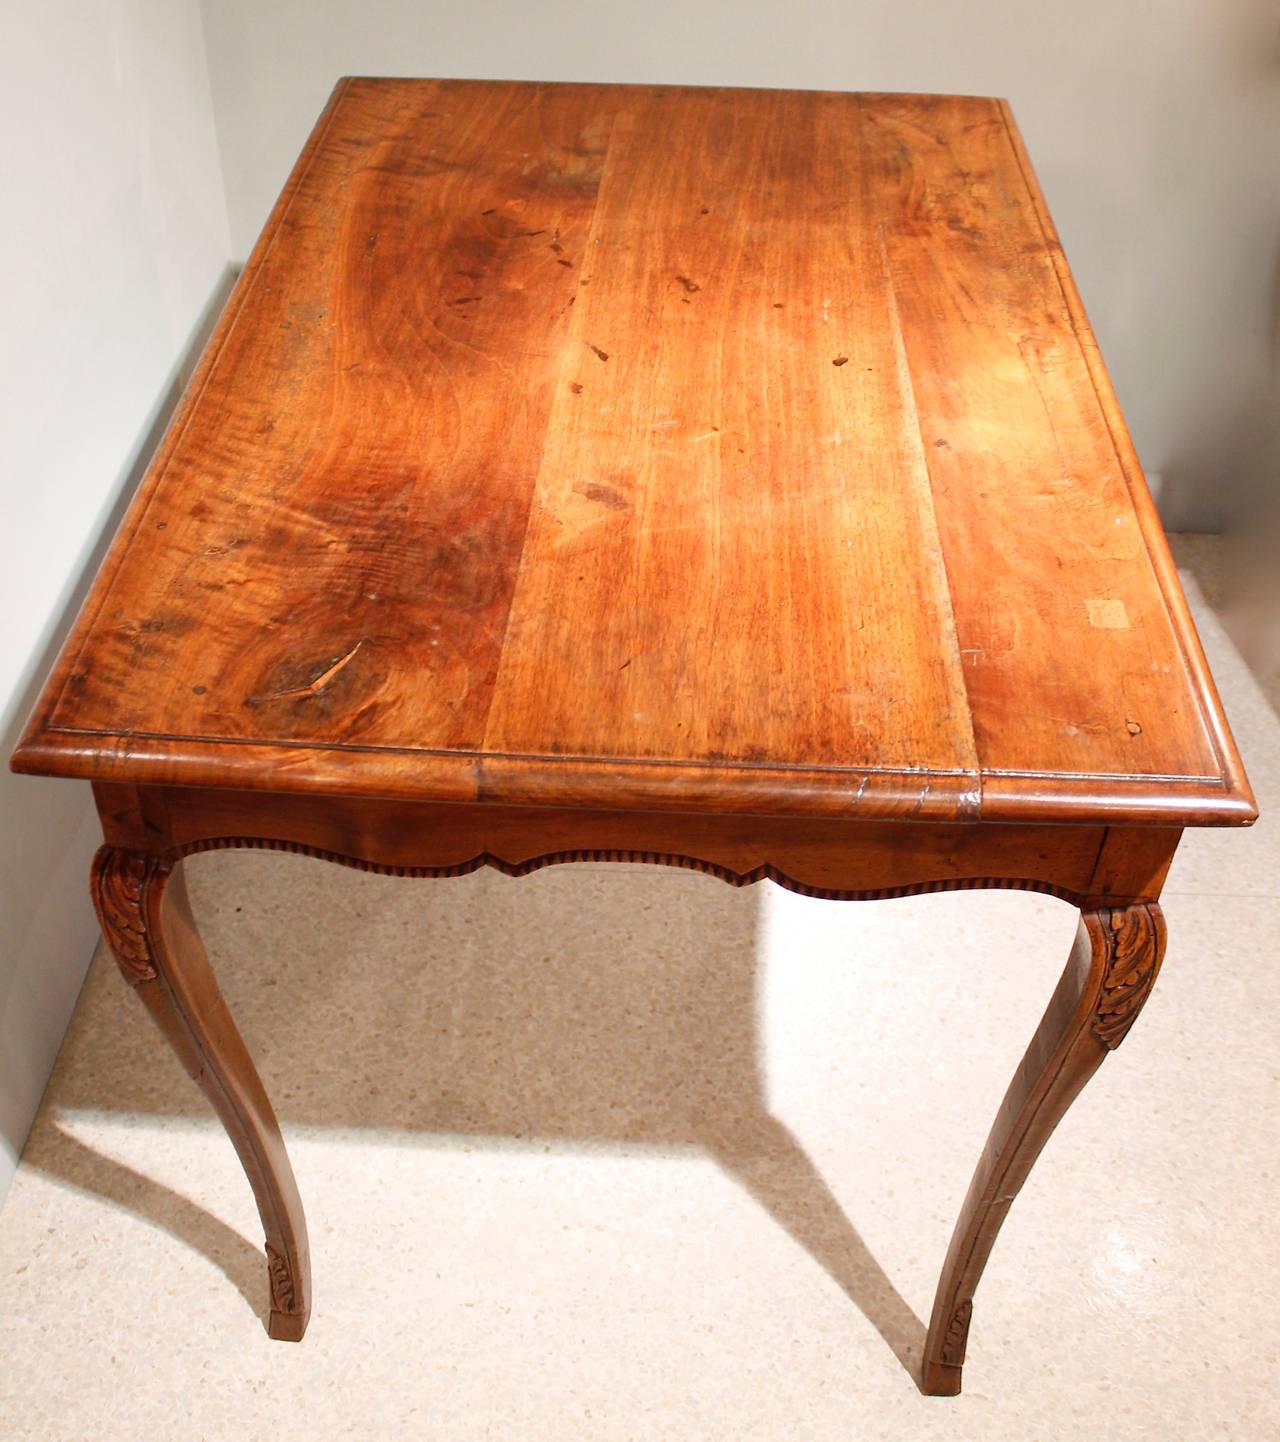 French Provincial Table with Hoof Feet, 19th Century For Sale 1